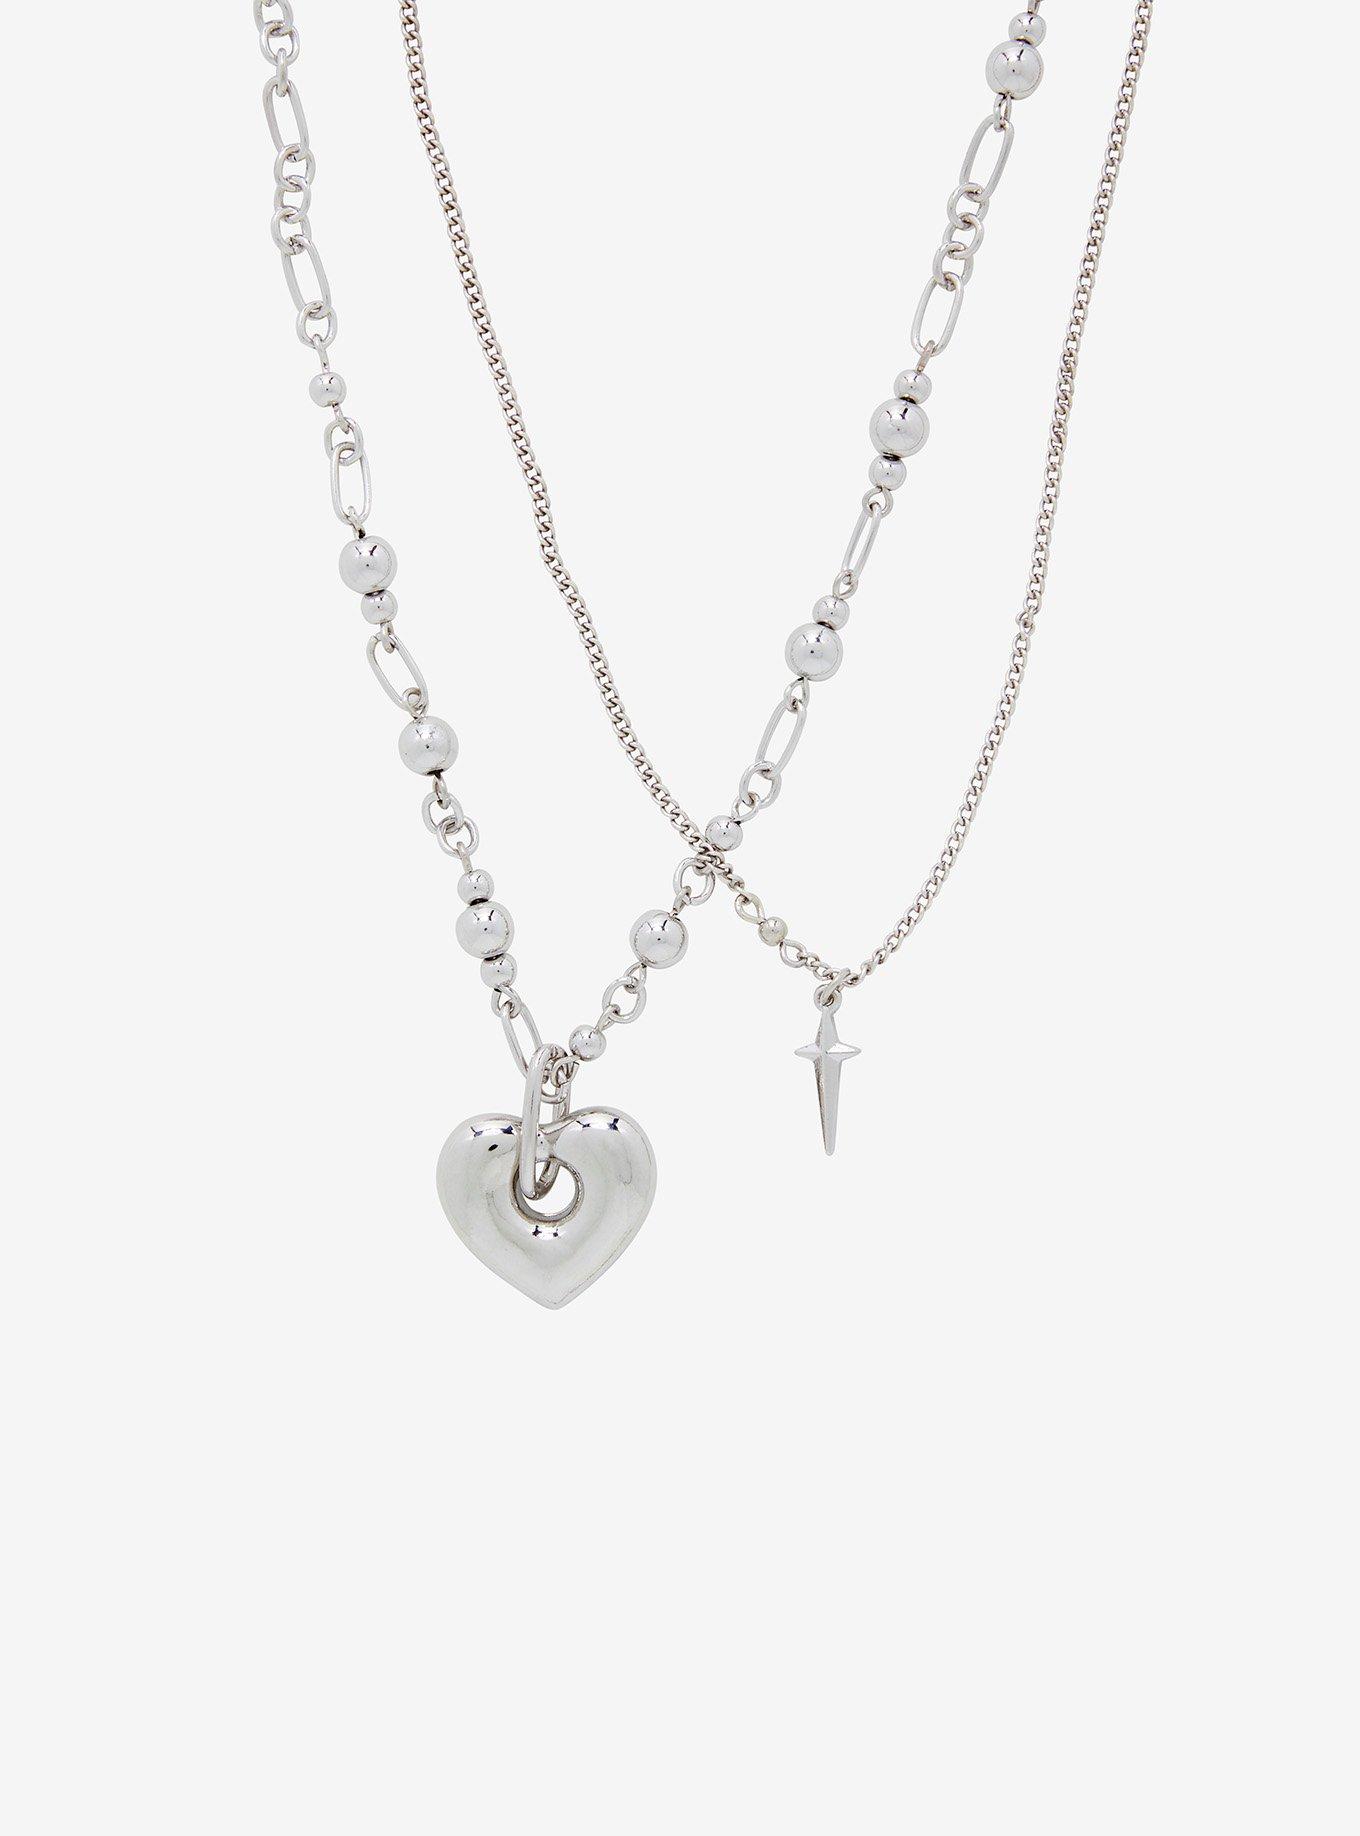 Social Collision® Heart Star Chain Necklace Set